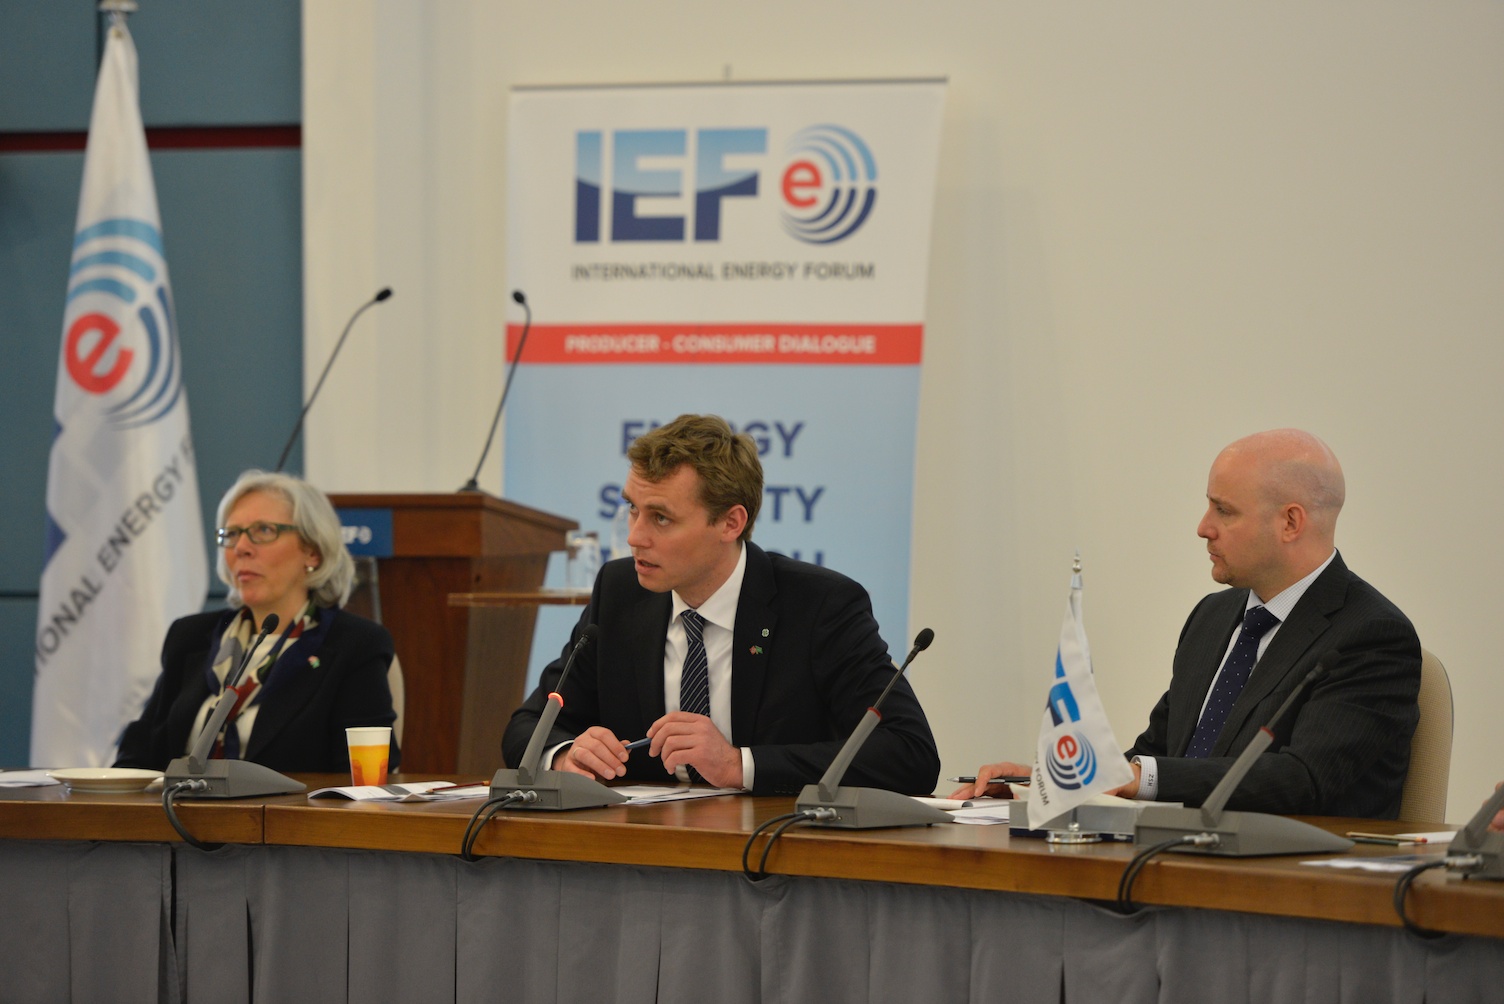 IEF Lecture Norwegian Minister  (5)  04 14 2013